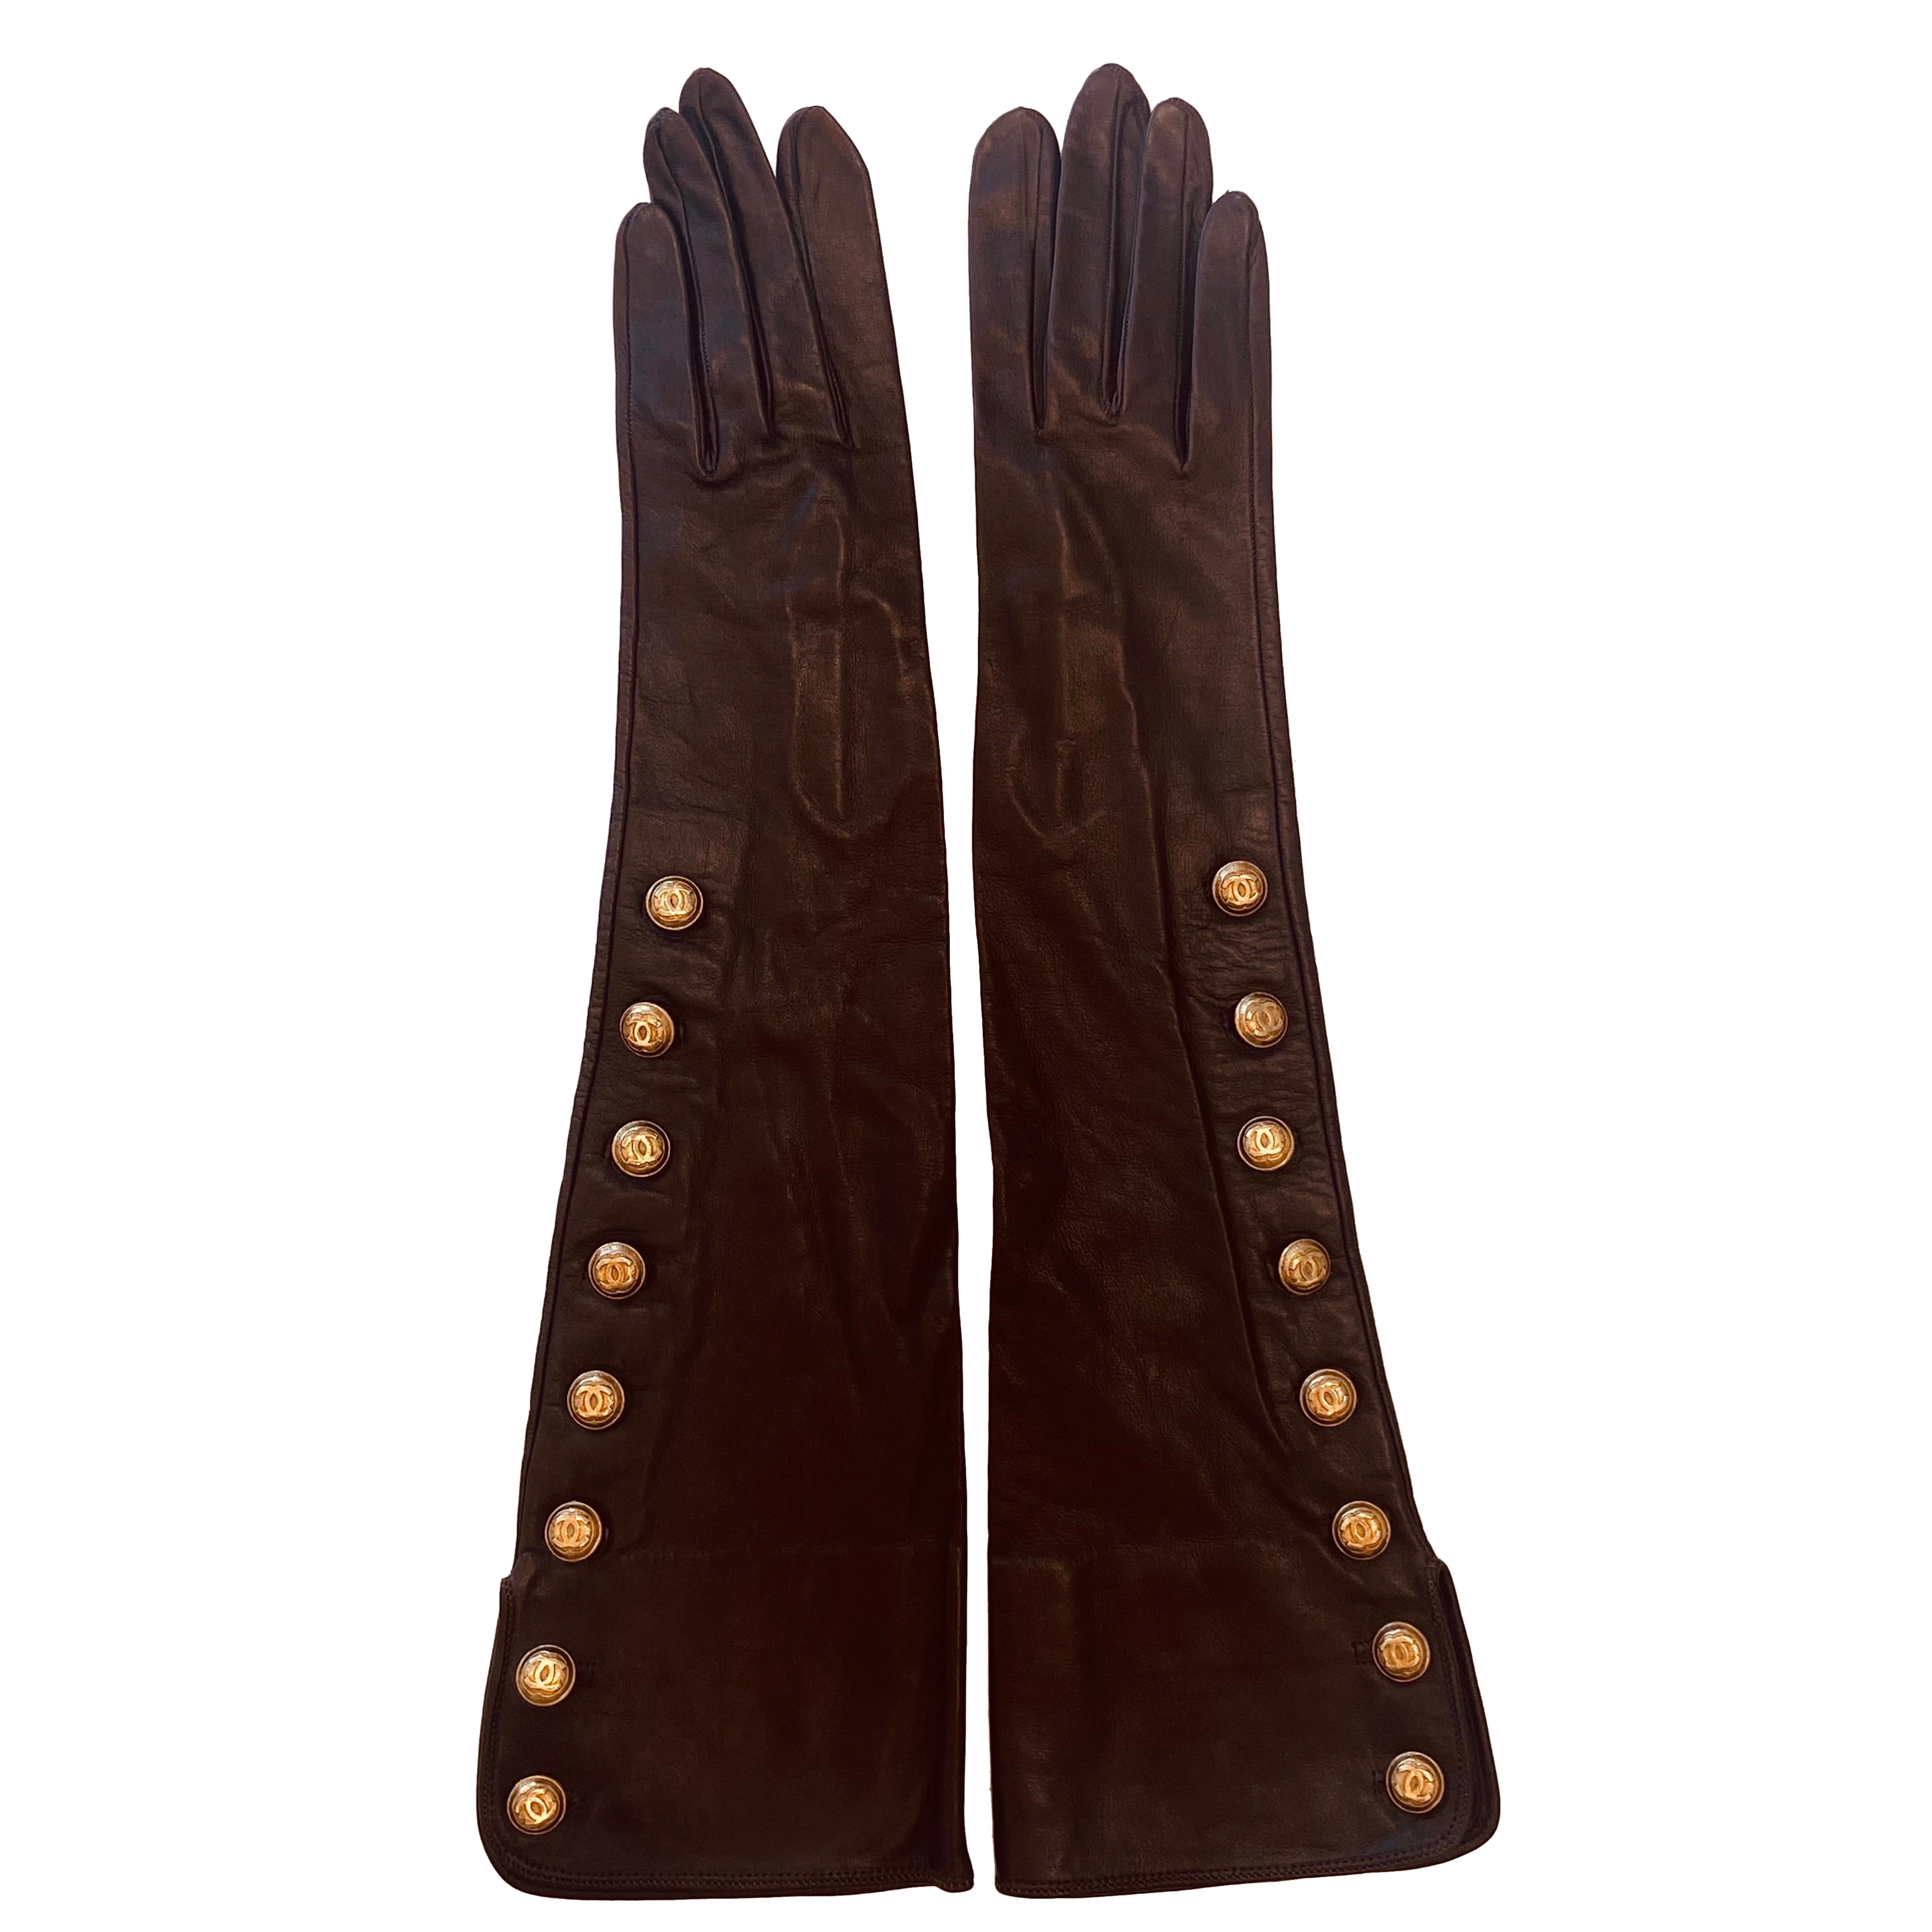 Chanel Buttery Soft Chocolate Brown Lamb Leather 8 Button Elbow Length Gloves 7 For Sale